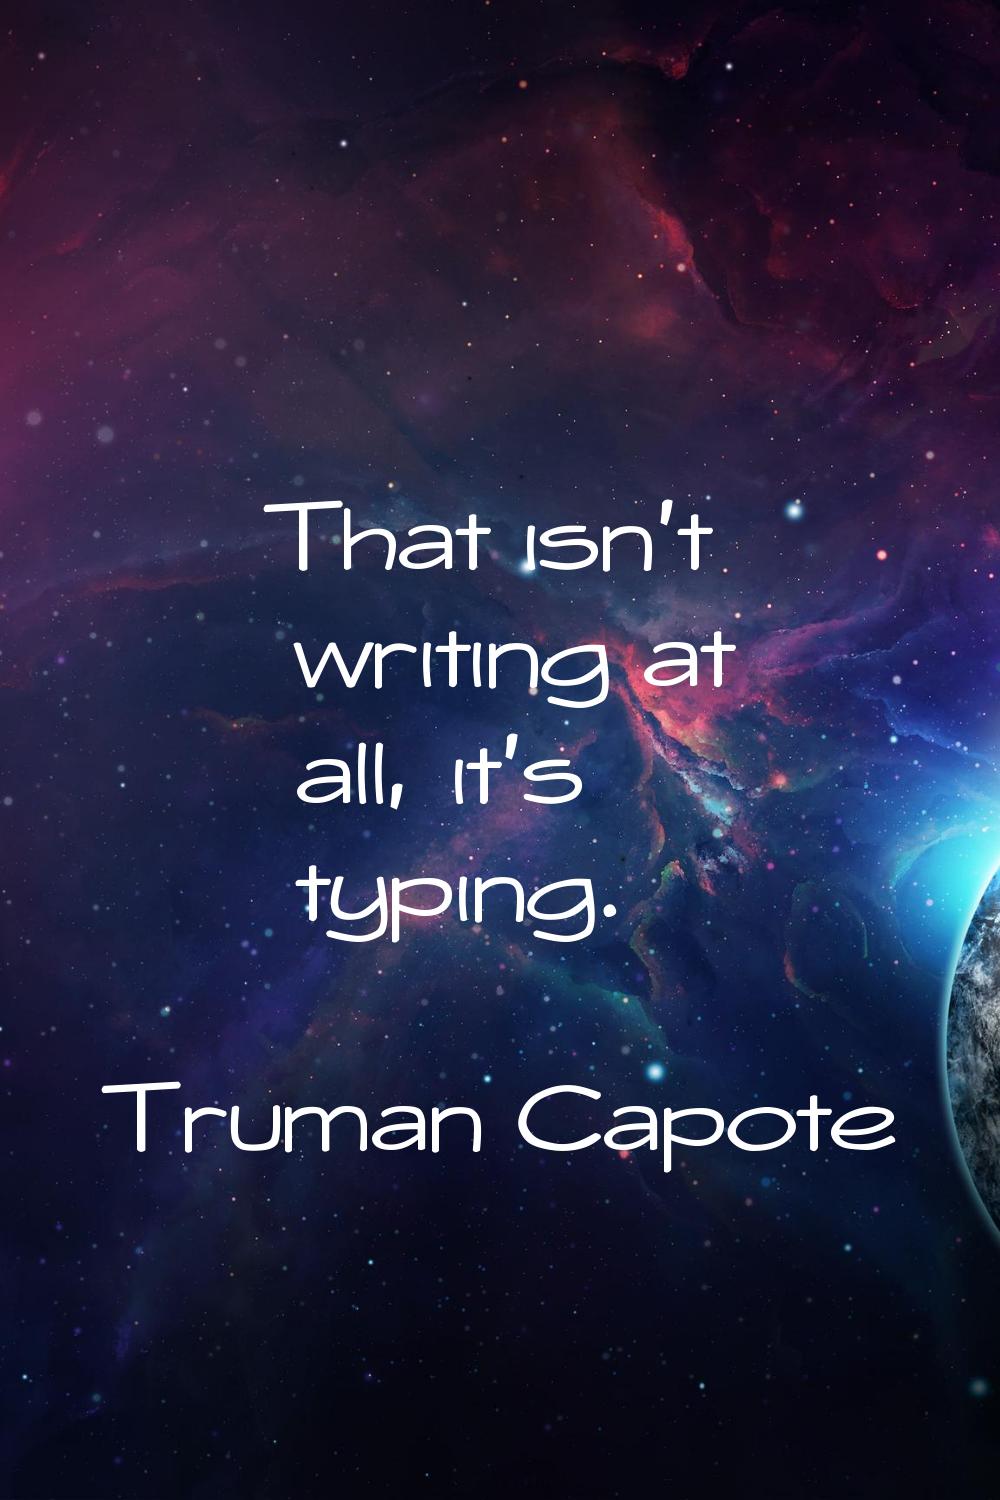 That isn't writing at all, it's typing.